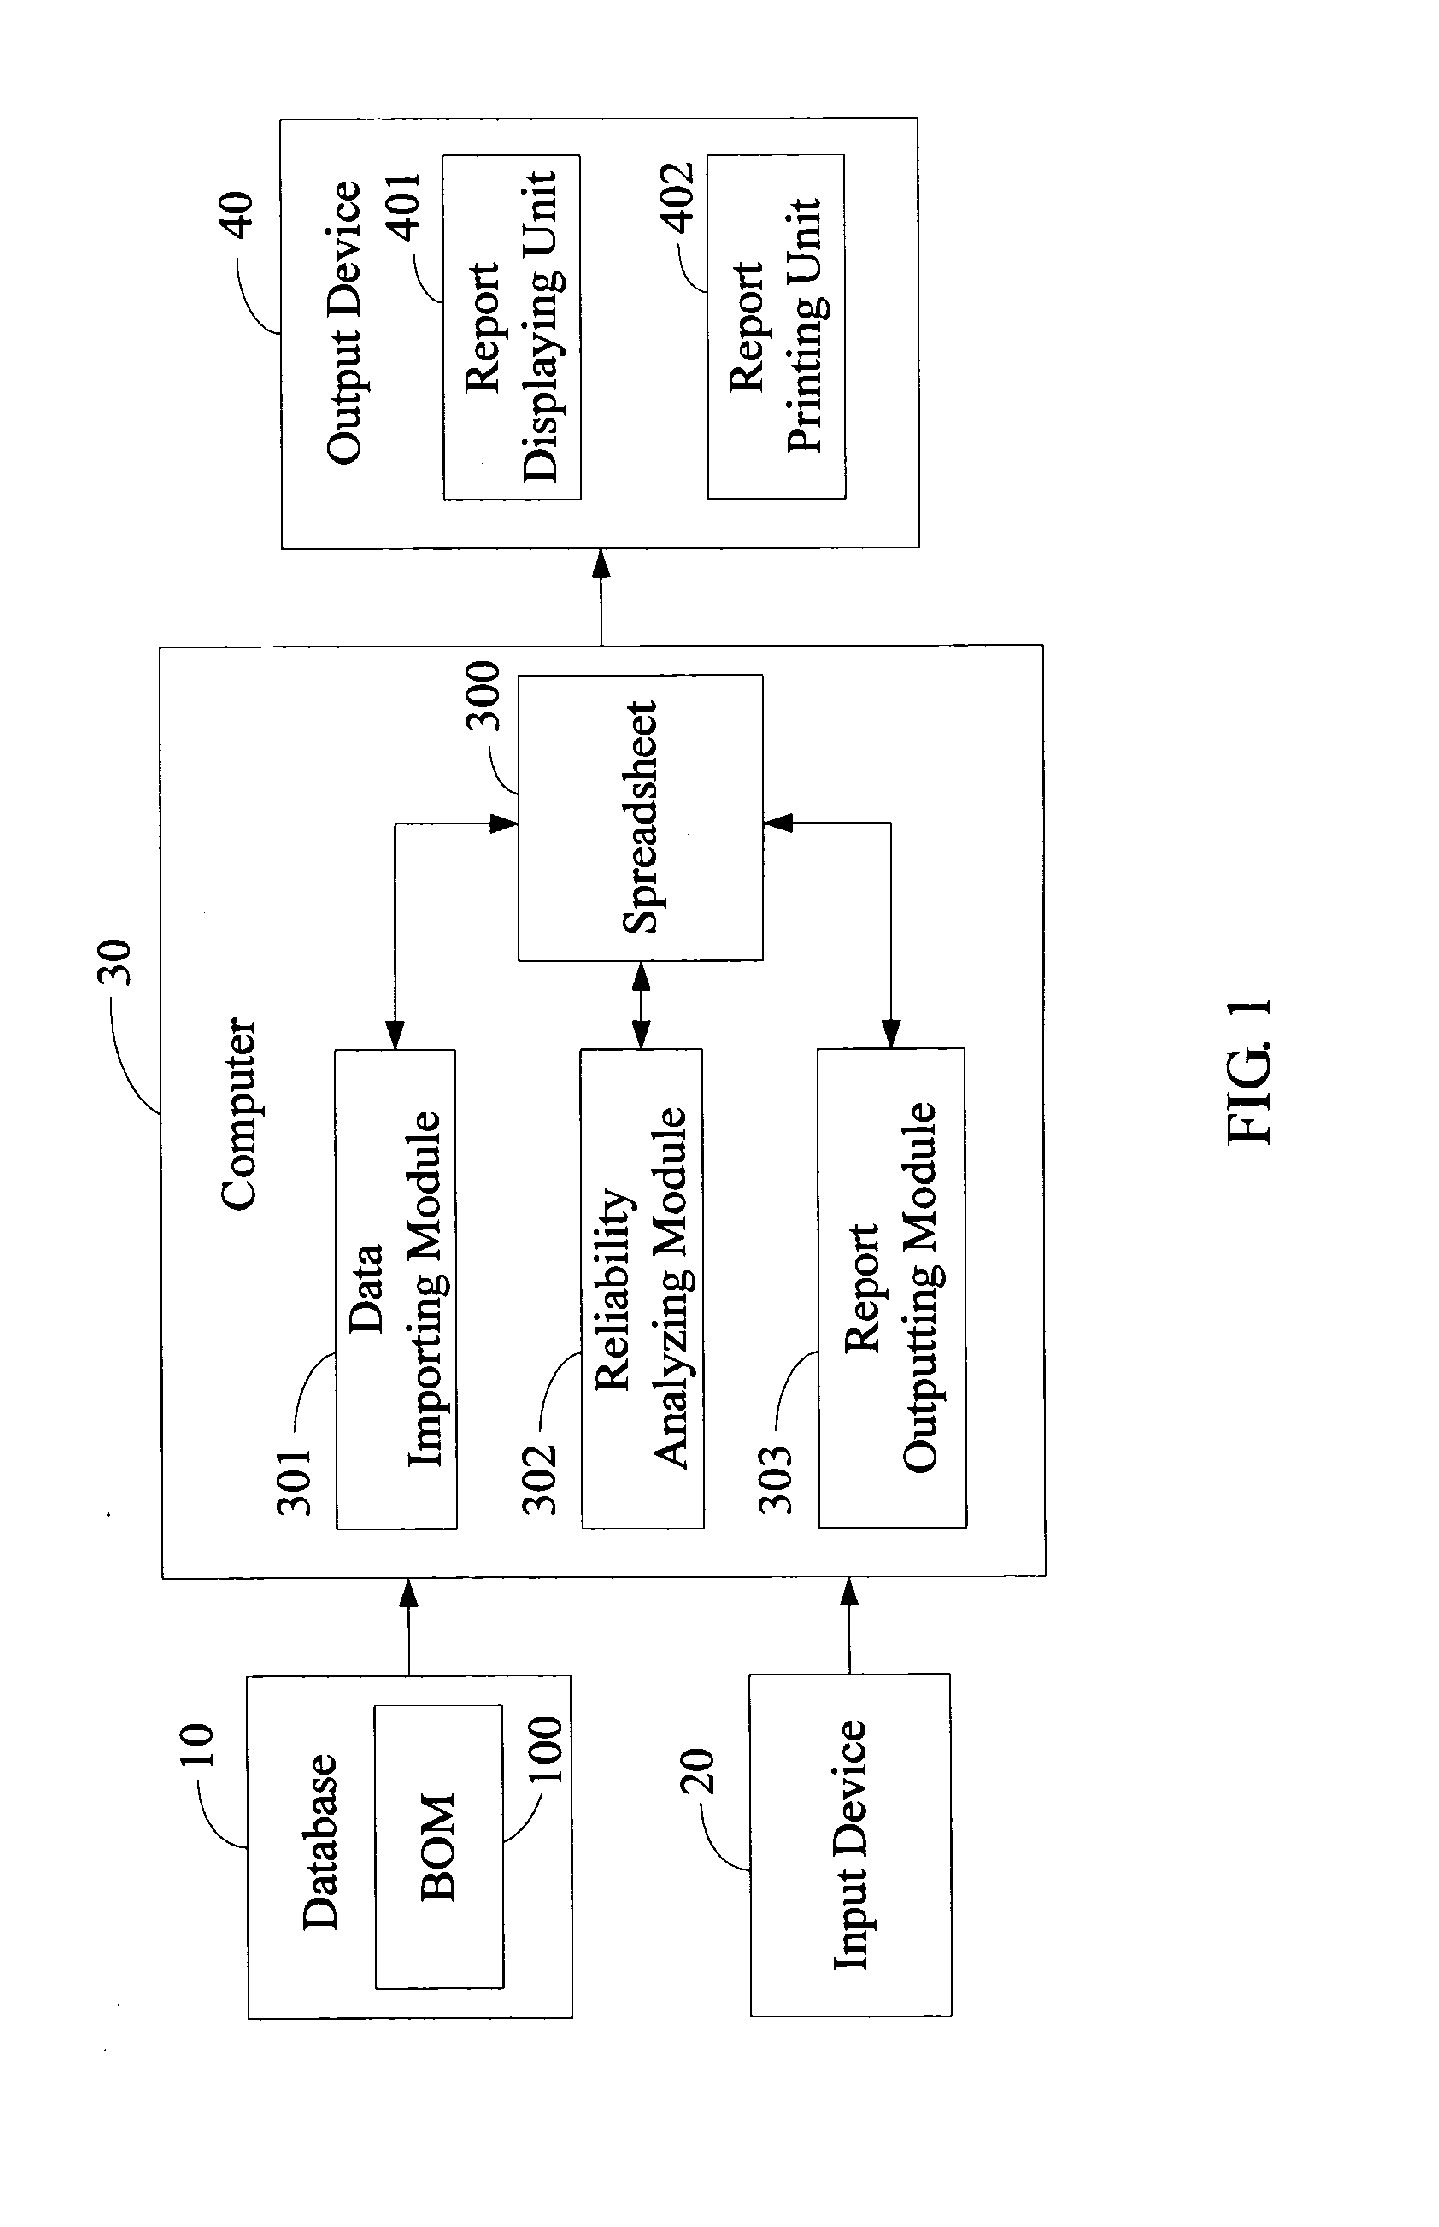 System and method for analyzing an mtbf of an electronic product